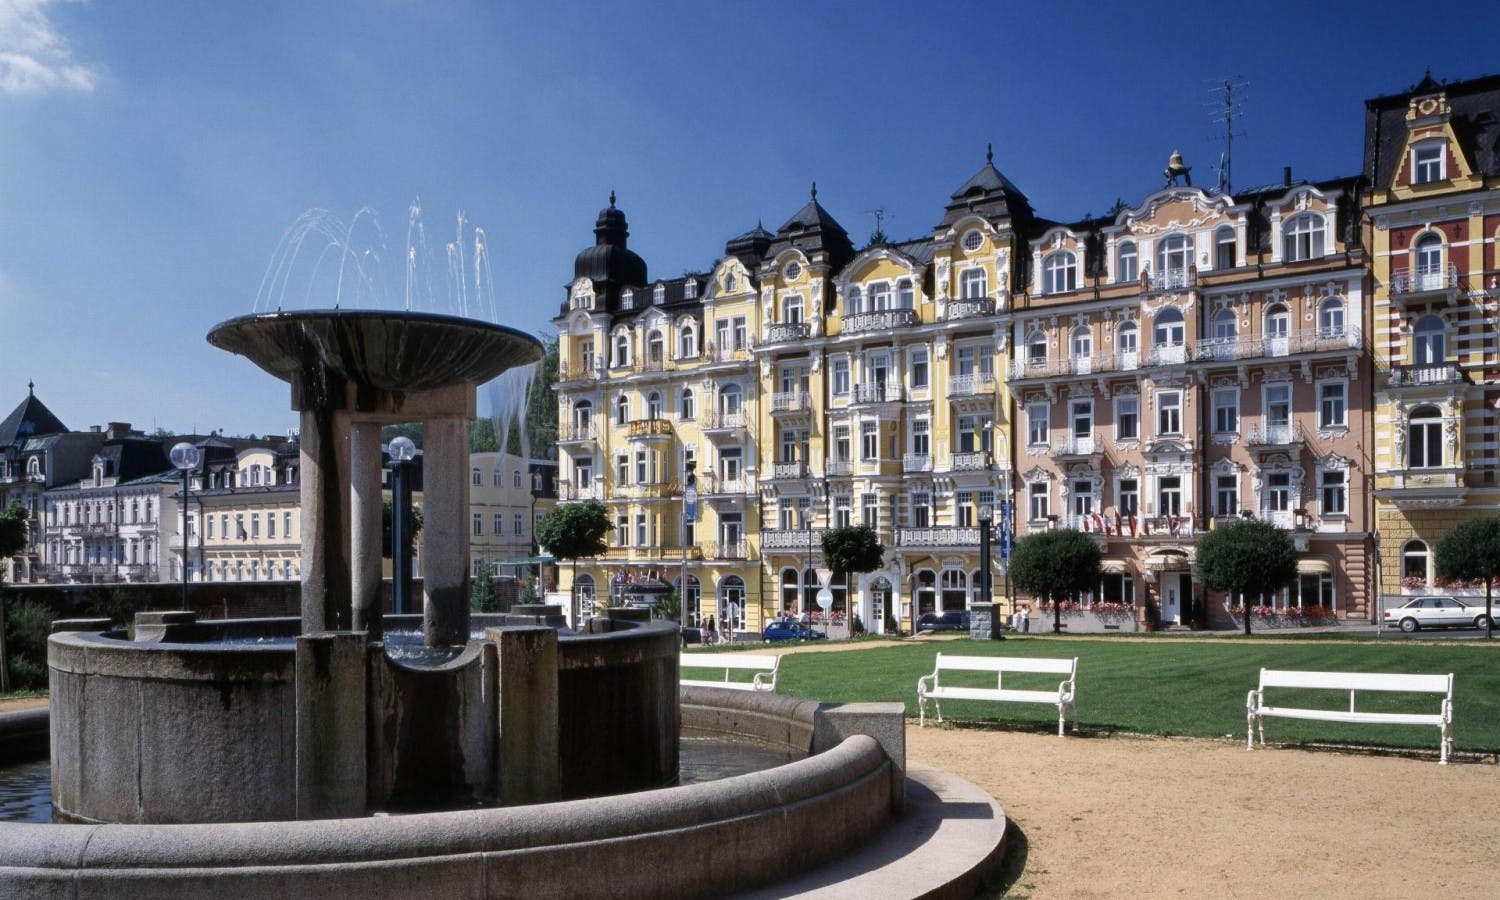 From Prague Karlovy Vary and Marianske Spa day trip Musement